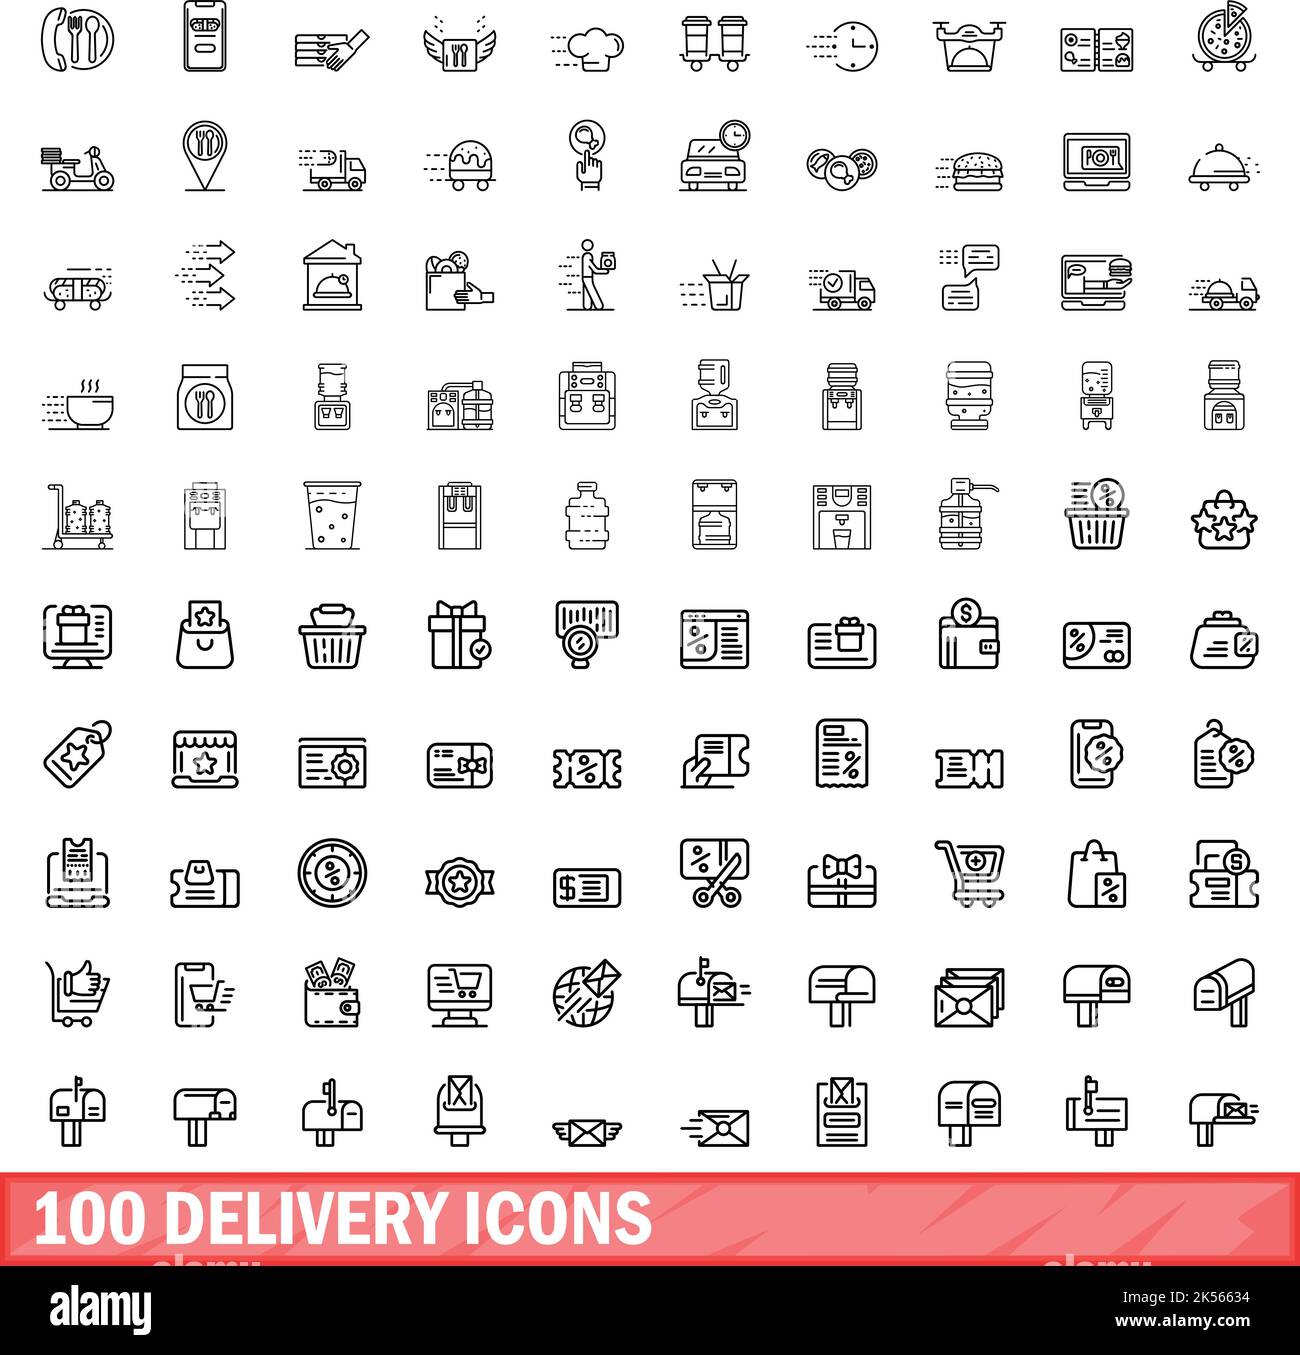 100 delivery icons set. Outline illustration of 100 delivery icons vector set isolated on white background Stock Vector